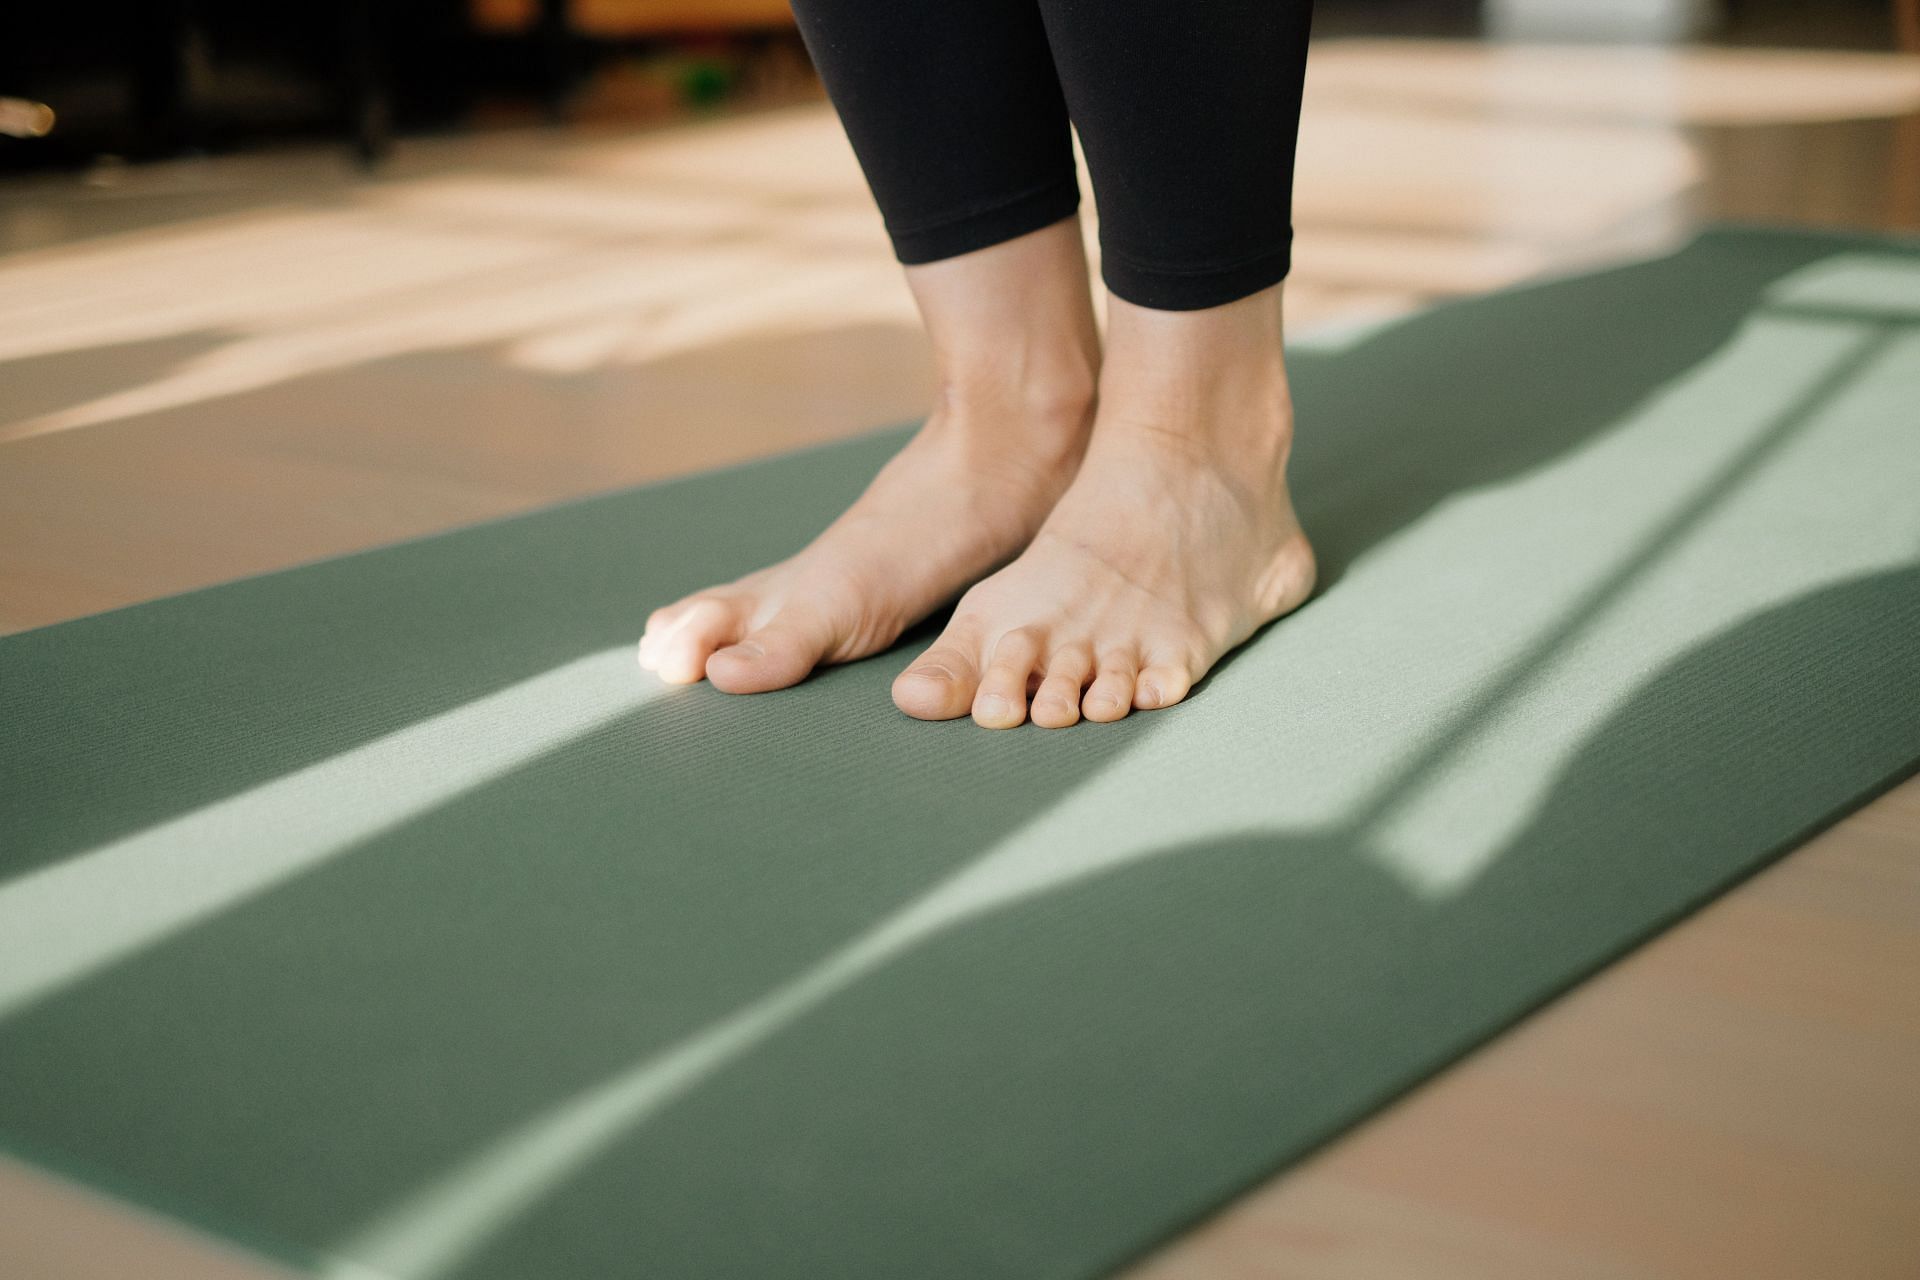 Yoga mats make performing asanas and other forms of exercise comfortable and secure. (Image via Unsplash/ Junseong Lee)